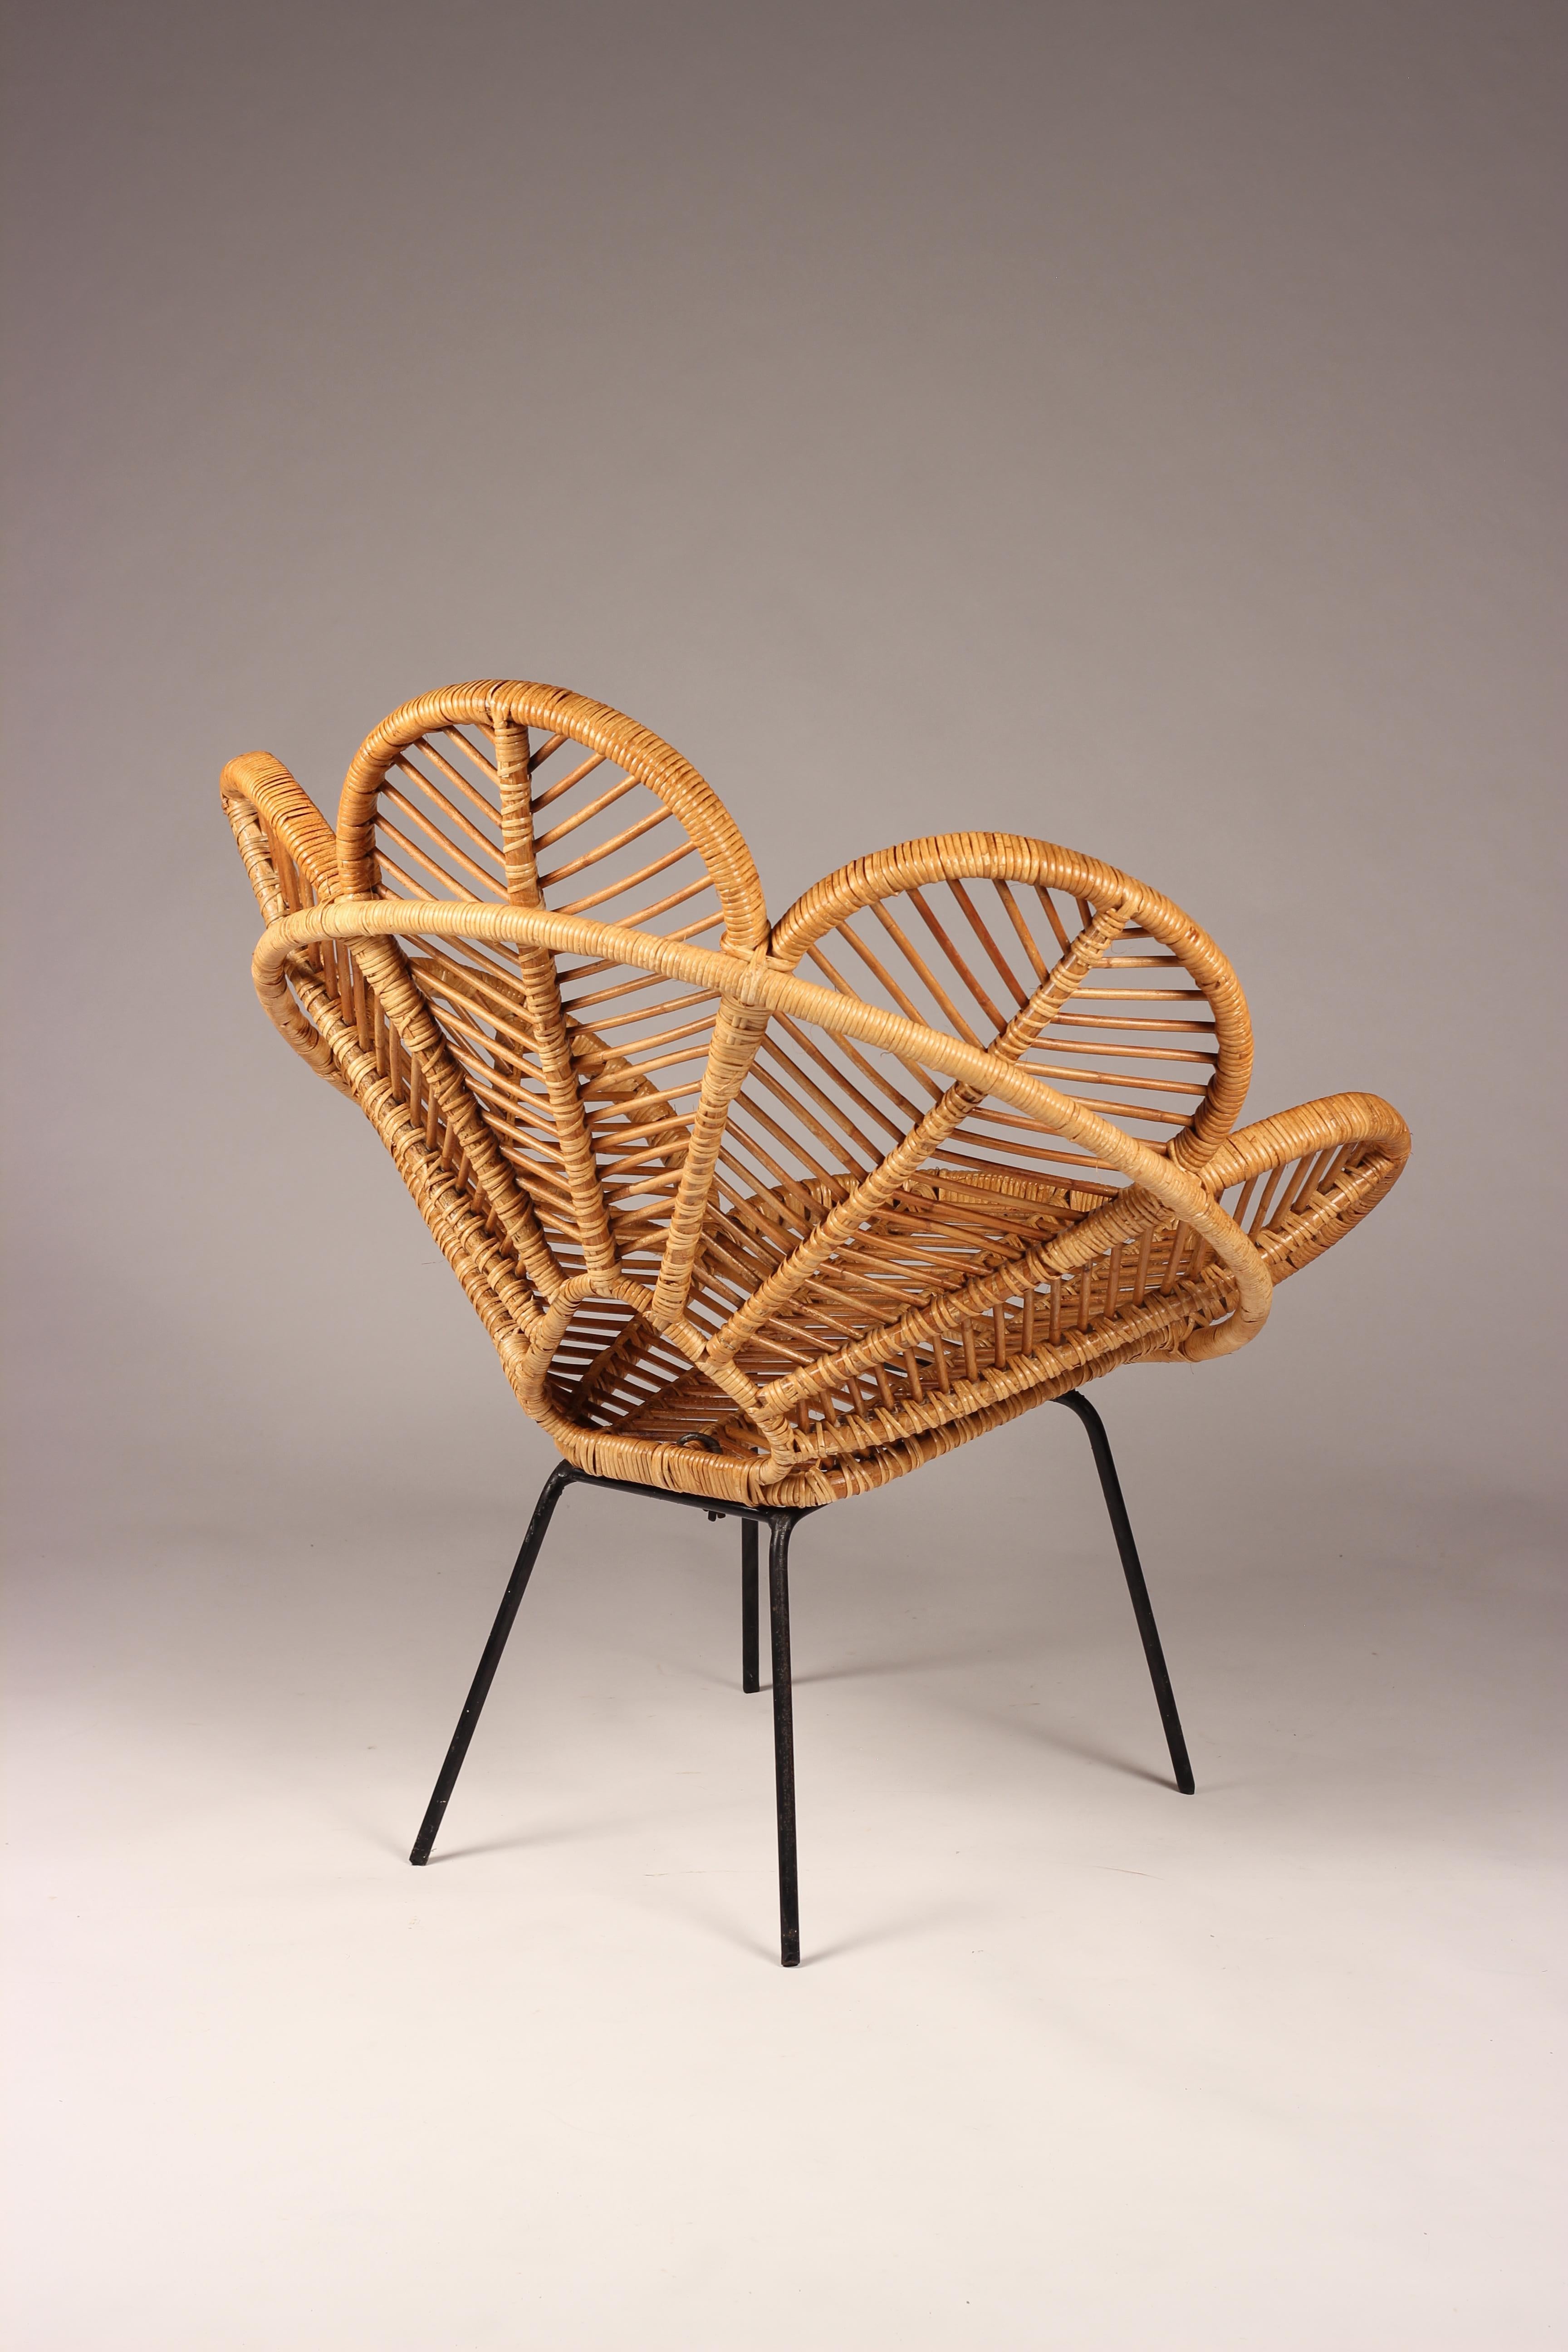 Pair of Garden Chairs Mid Century French Design in Cane, Wicker and Raffia 1